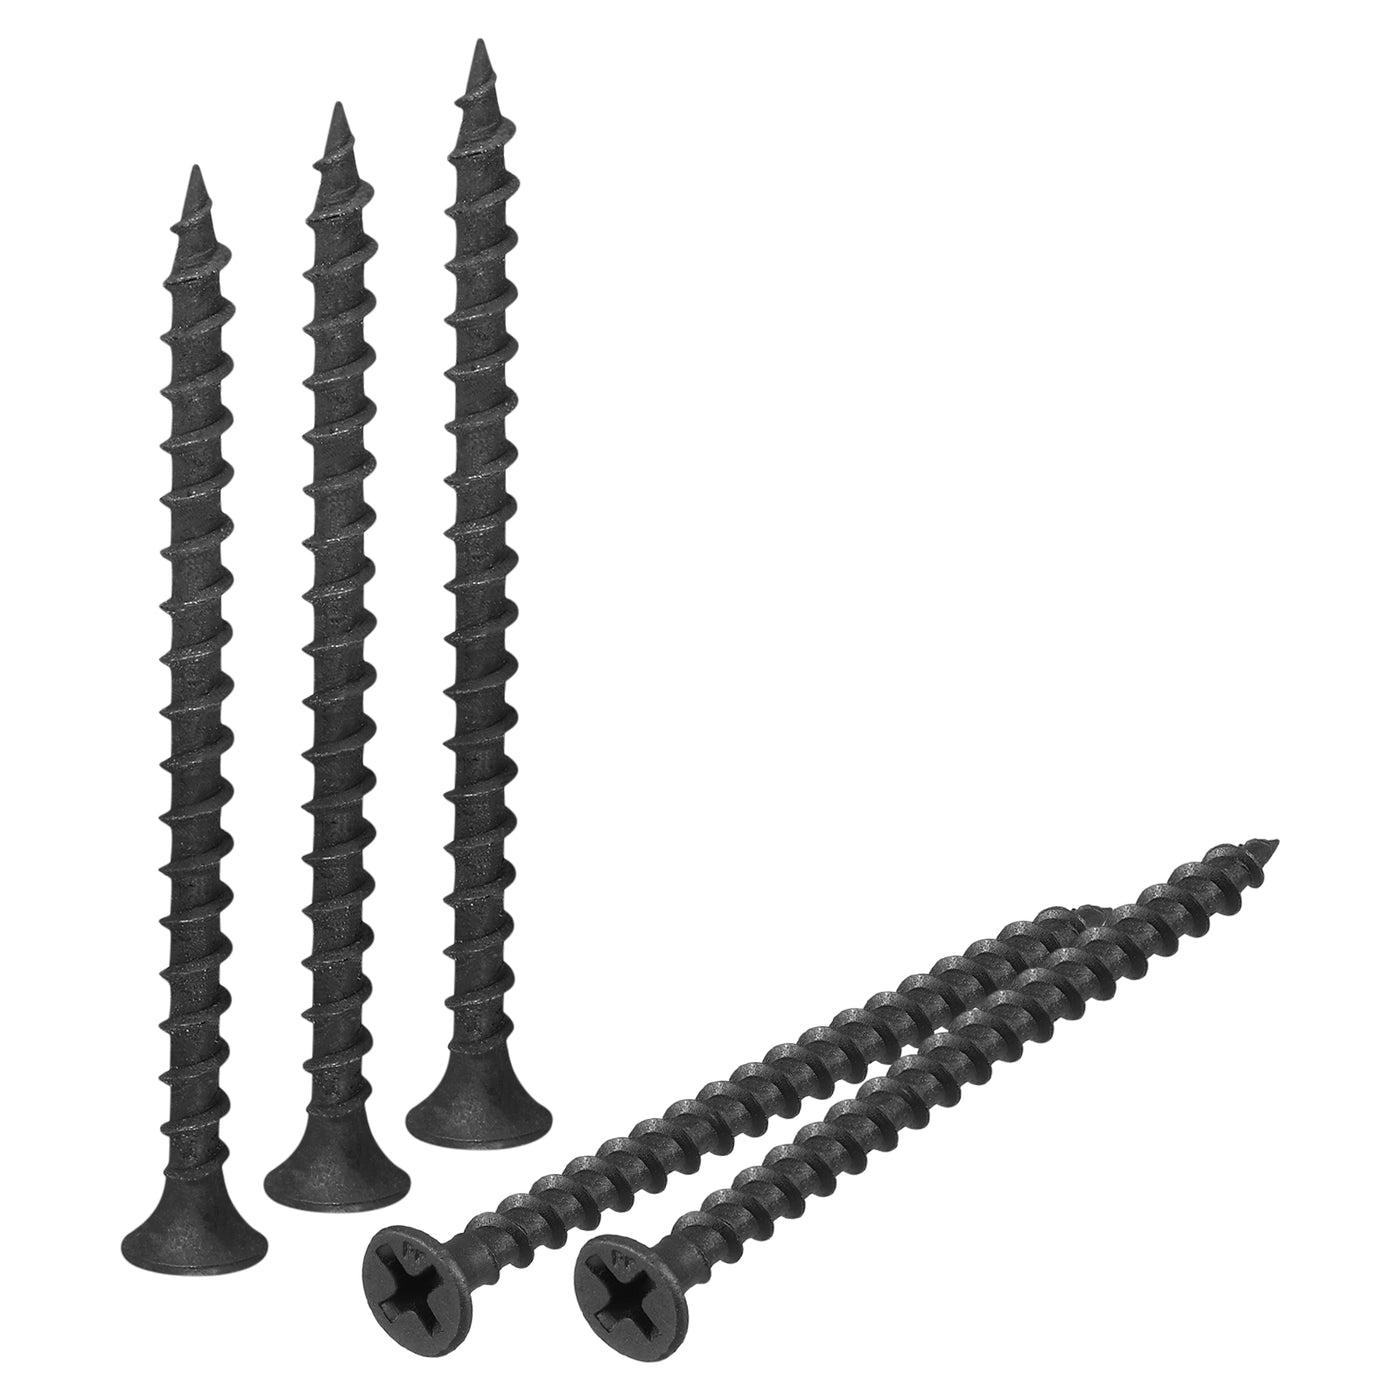 uxcell Uxcell M3.8x60mm 50pcs Phillips Drive Wood Screws, Carbon Steel Self Tapping Screws